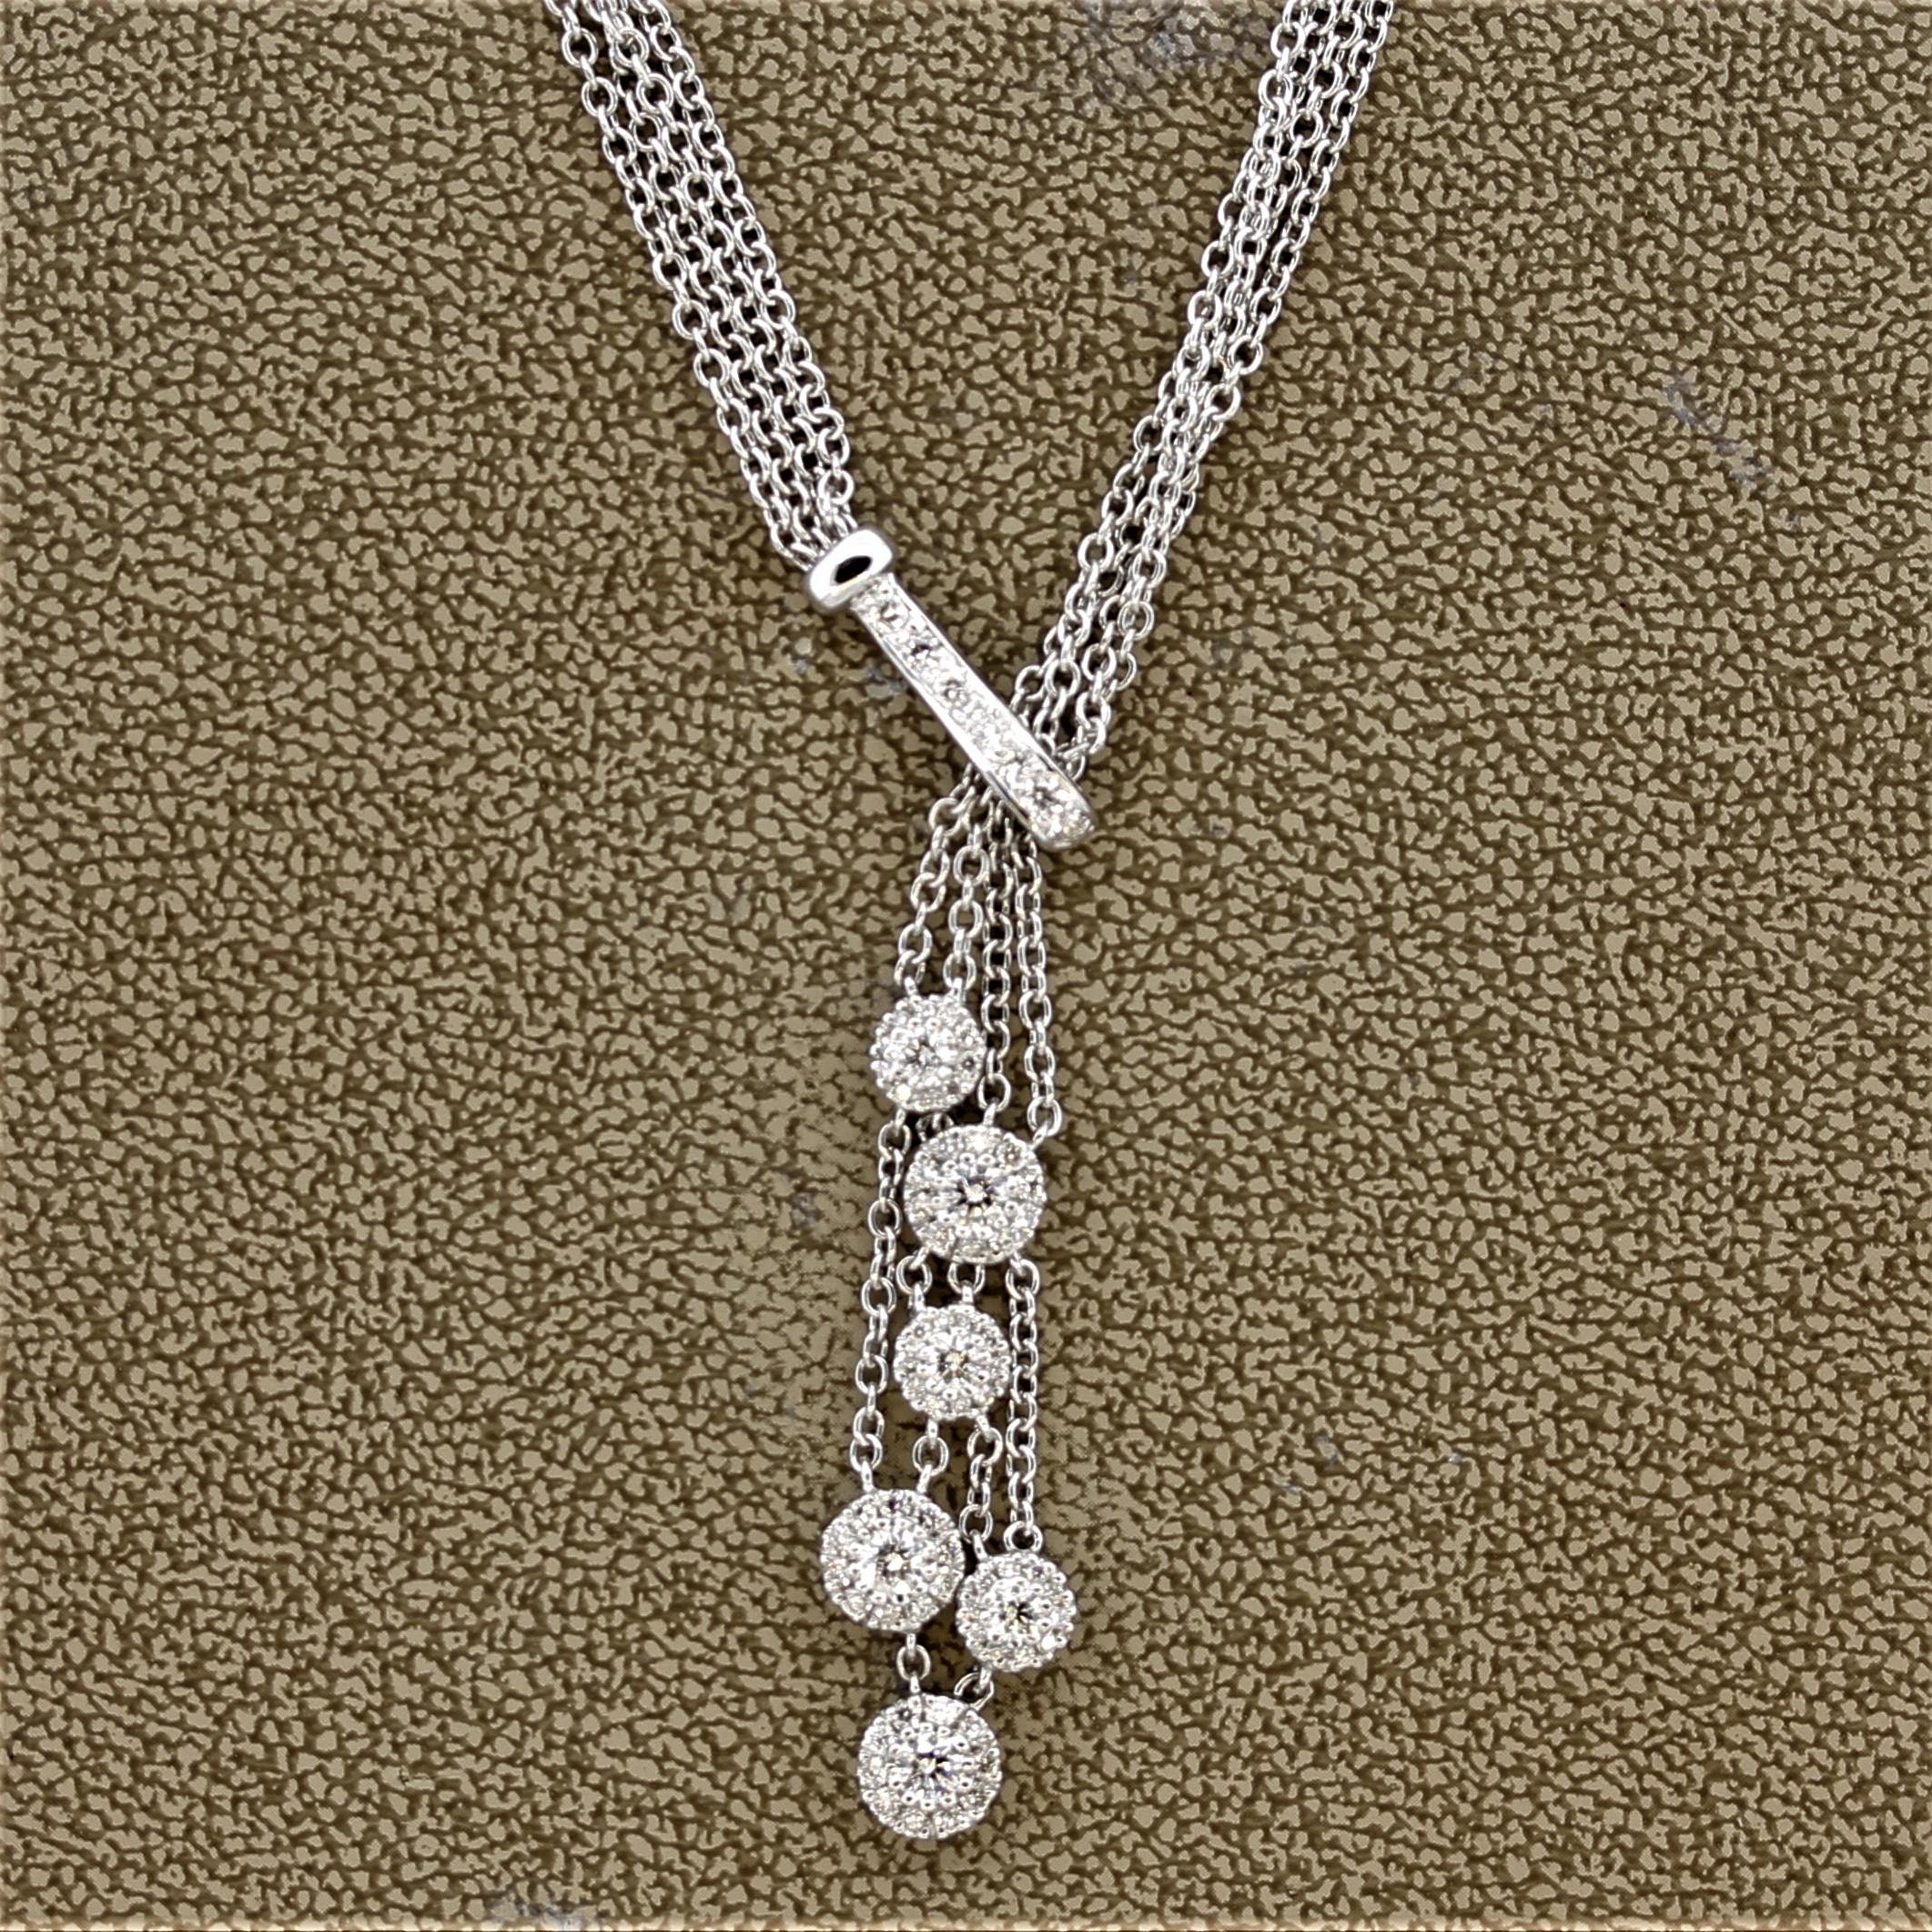 An elegant and chic necklace made in 18k white gold. It features 1.05 carats of round brilliant cut diamonds set in a floral pattern and accenting the goldwork. Made with a 4-strand necklace, this piece will elevate any outfit to the next